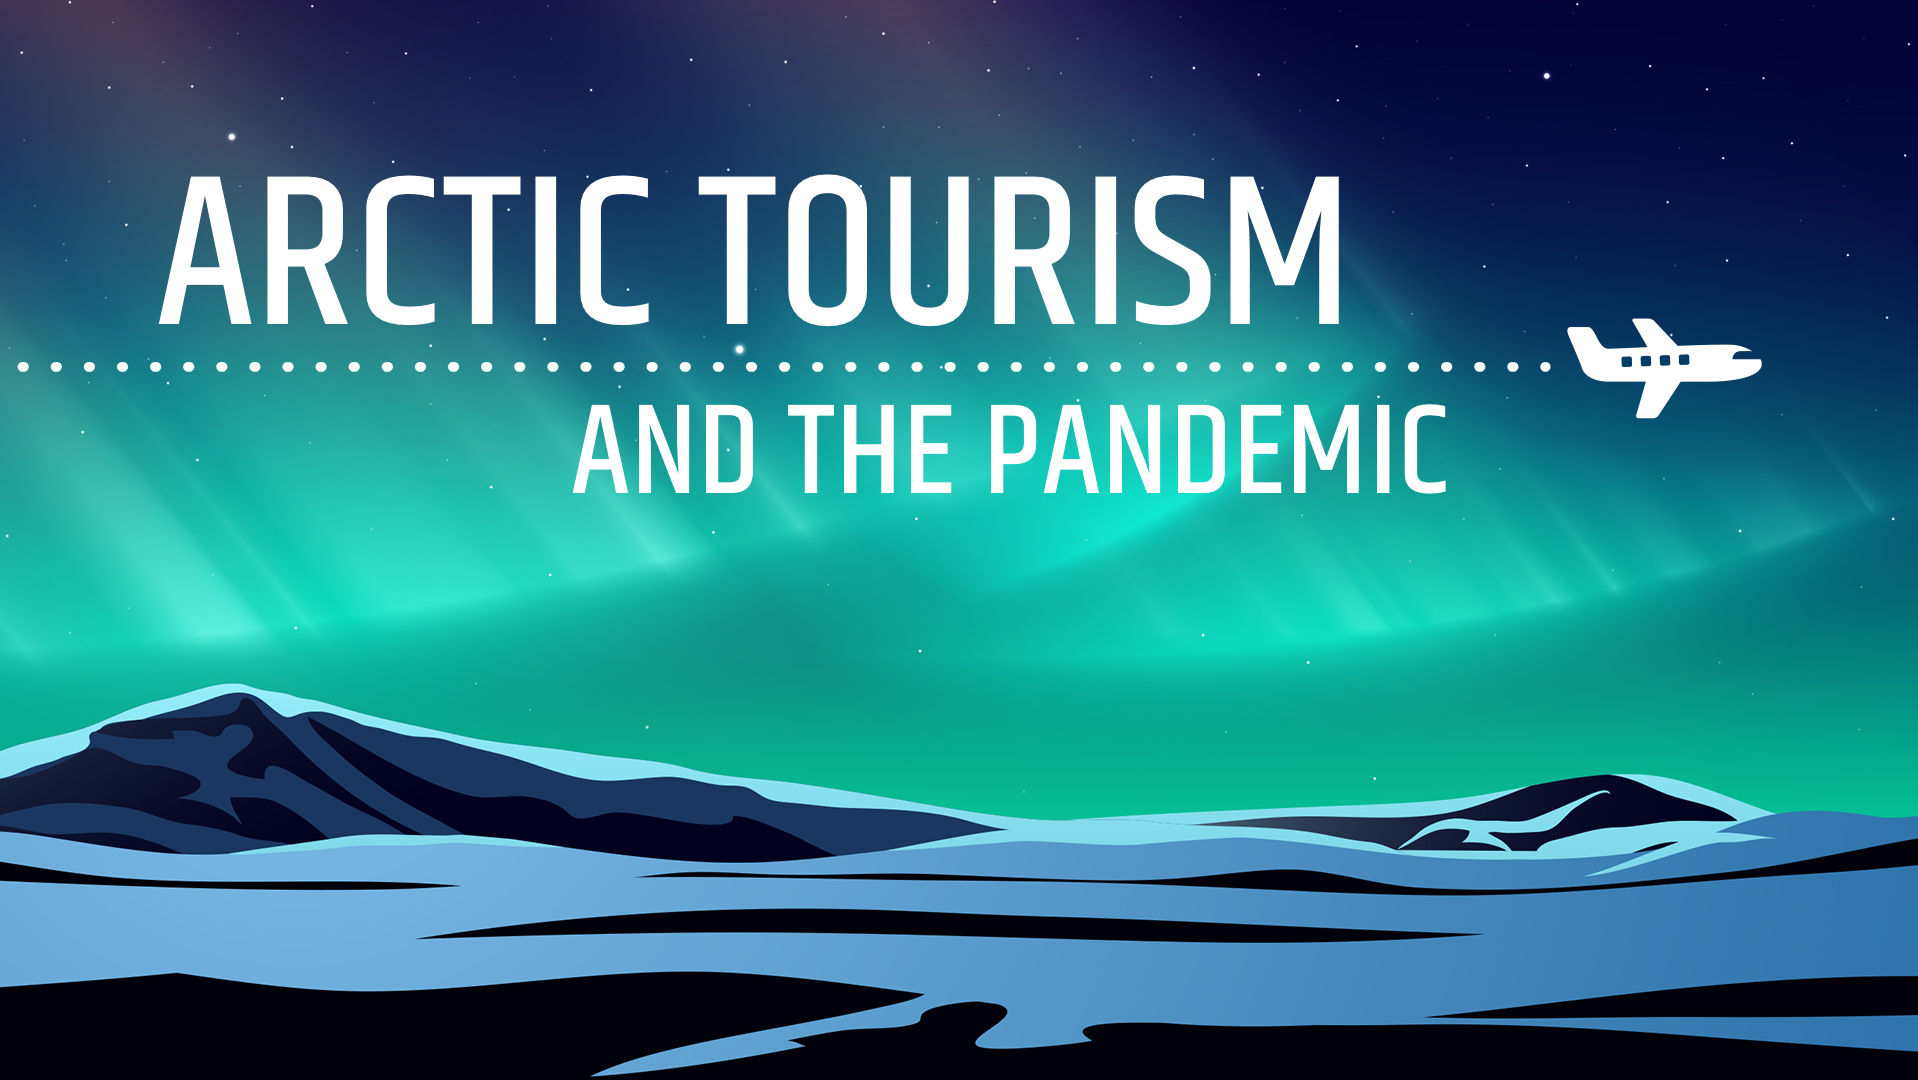 Arctic Tourism and the Pandemic